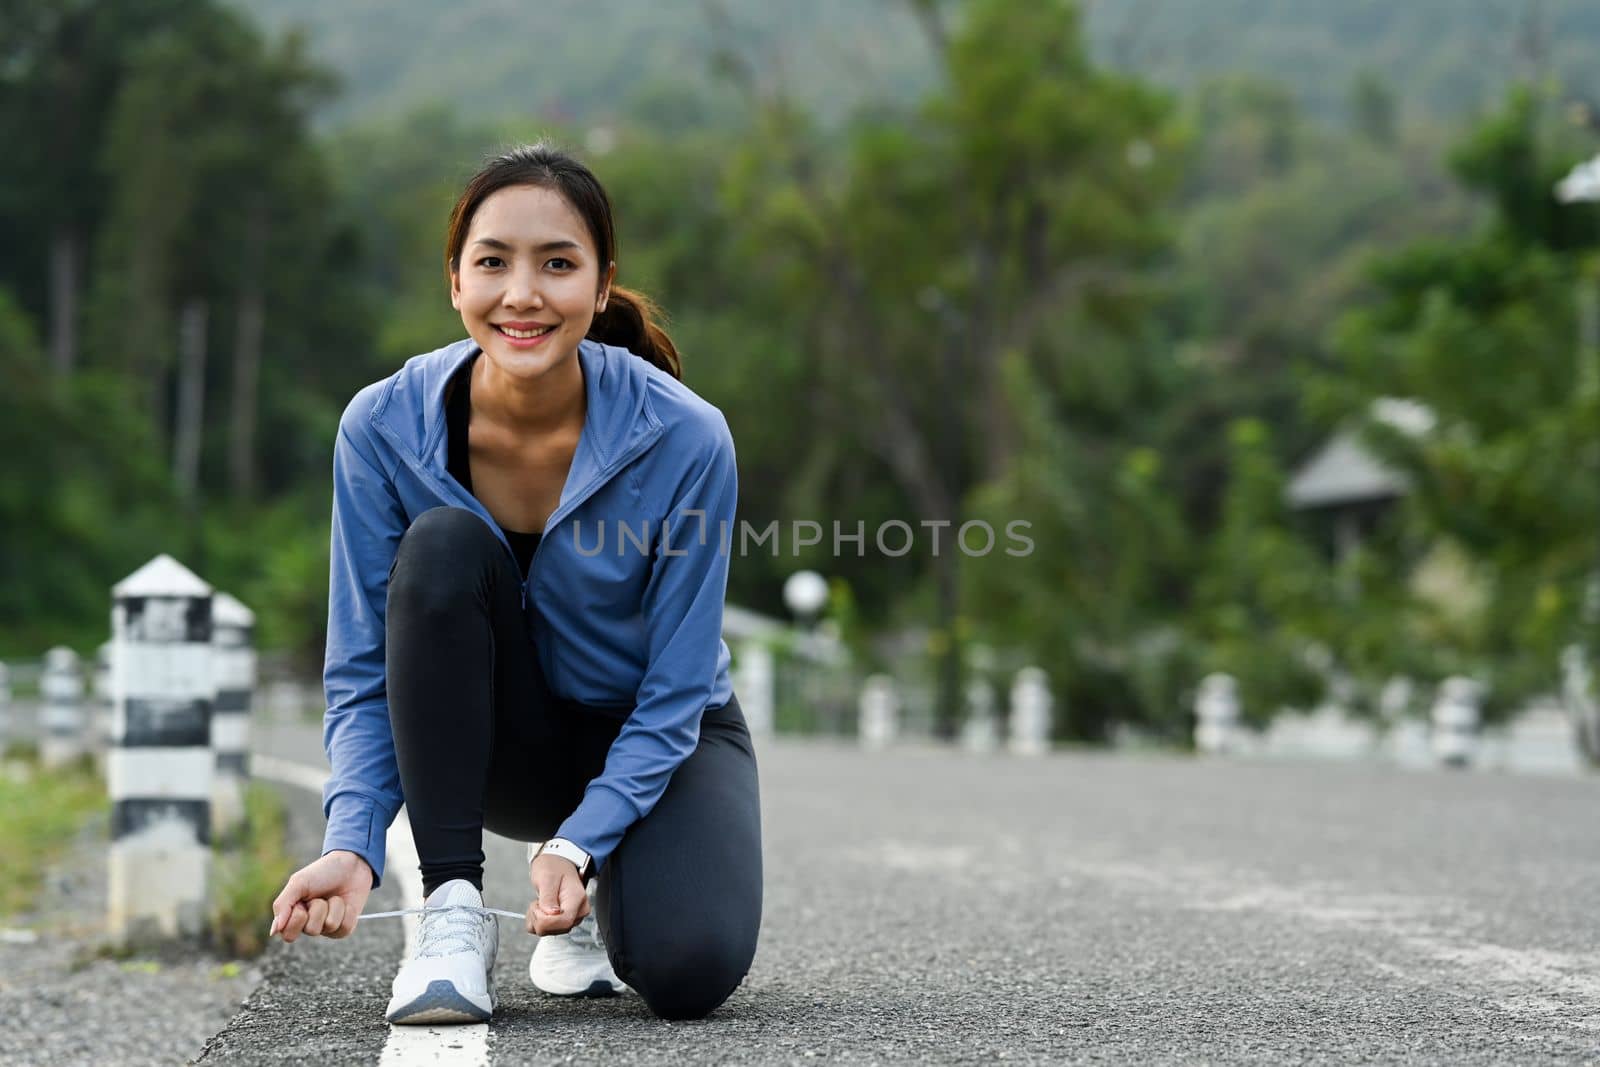 Smiling sportswoman tying shoelaces before running, getting ready for jogging outdoors. Healthy lifestyle concept by prathanchorruangsak